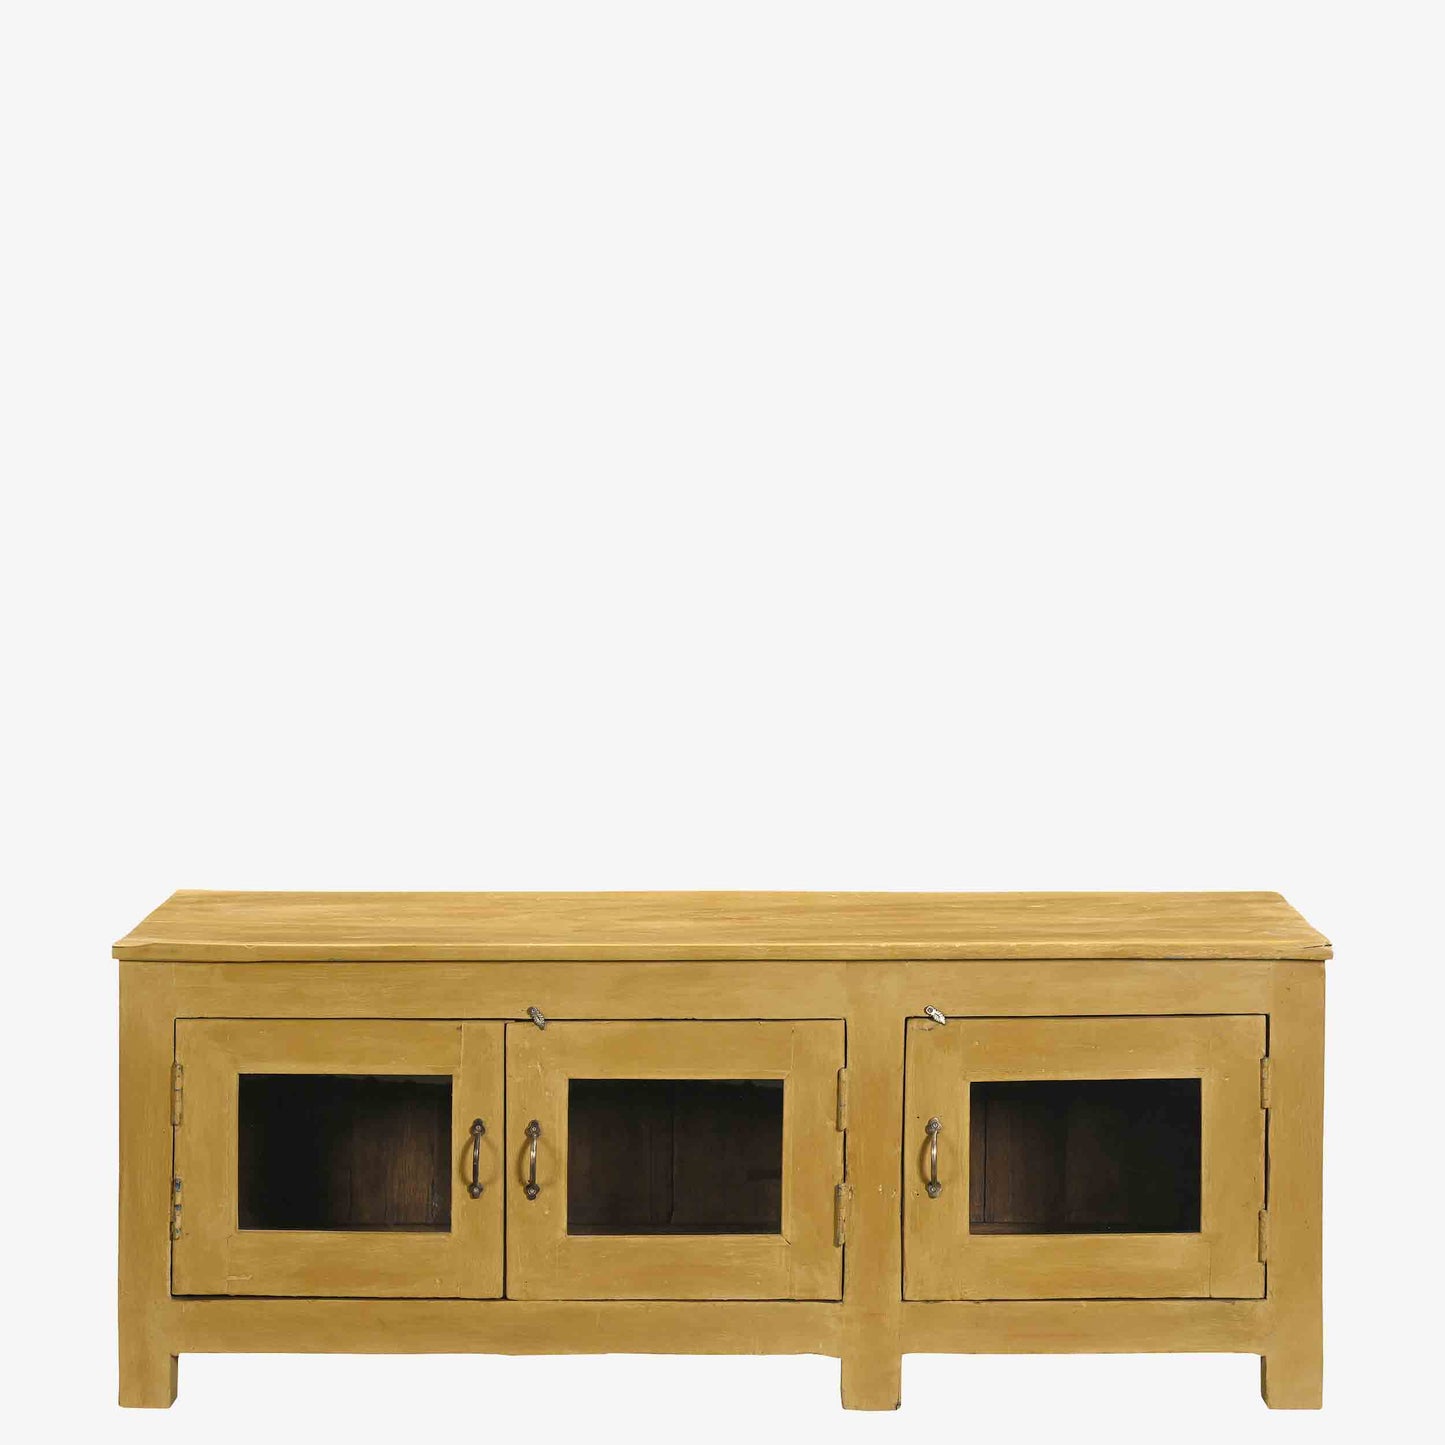 The Tir Antique Sideboard in Field of Wheat Yellow